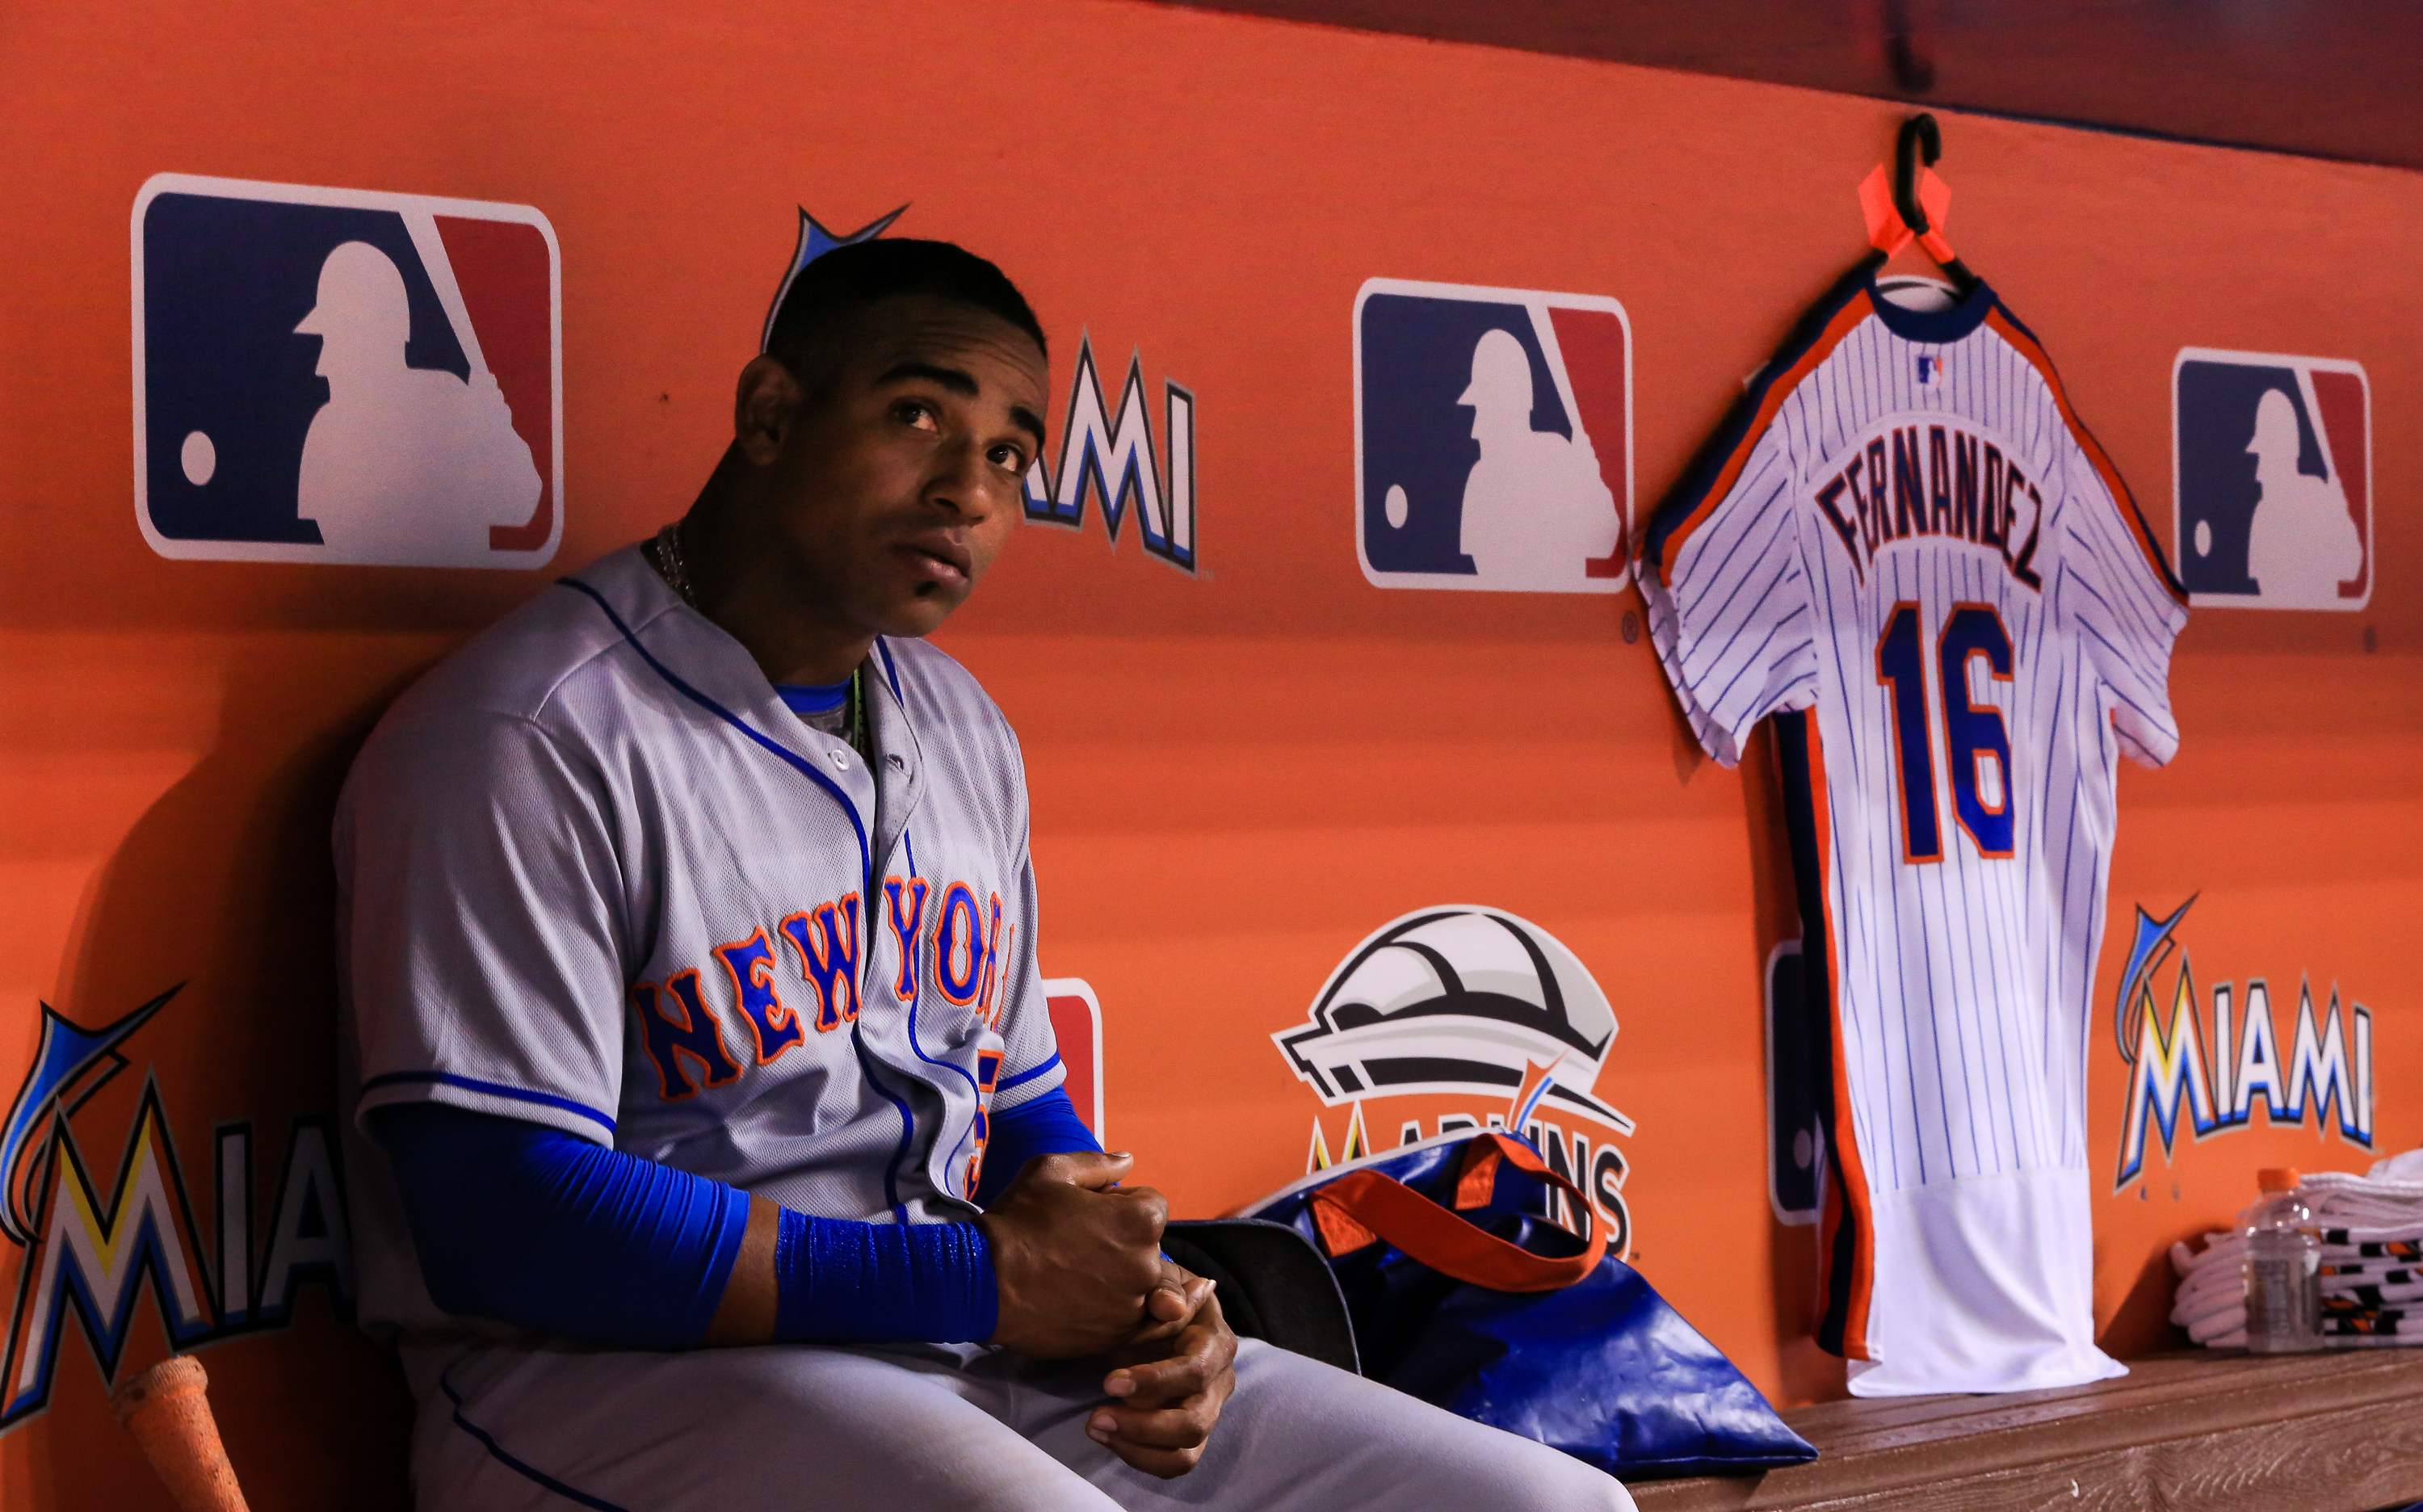 MIAMI, FL - SEPTEMBER 26: Yoenis Cespedes #52 of the New York Mets looks on from the dugout where he had hung a Jose Fernandez jersey in honor of the late pitcher during the game against the Miami Marlins at Marlins Park on September 26, 2016 in Miami, Florida. (Photo by Rob Foldy/Getty Images) ORG XMIT: 607685695 ORIG FILE ID: 610610546